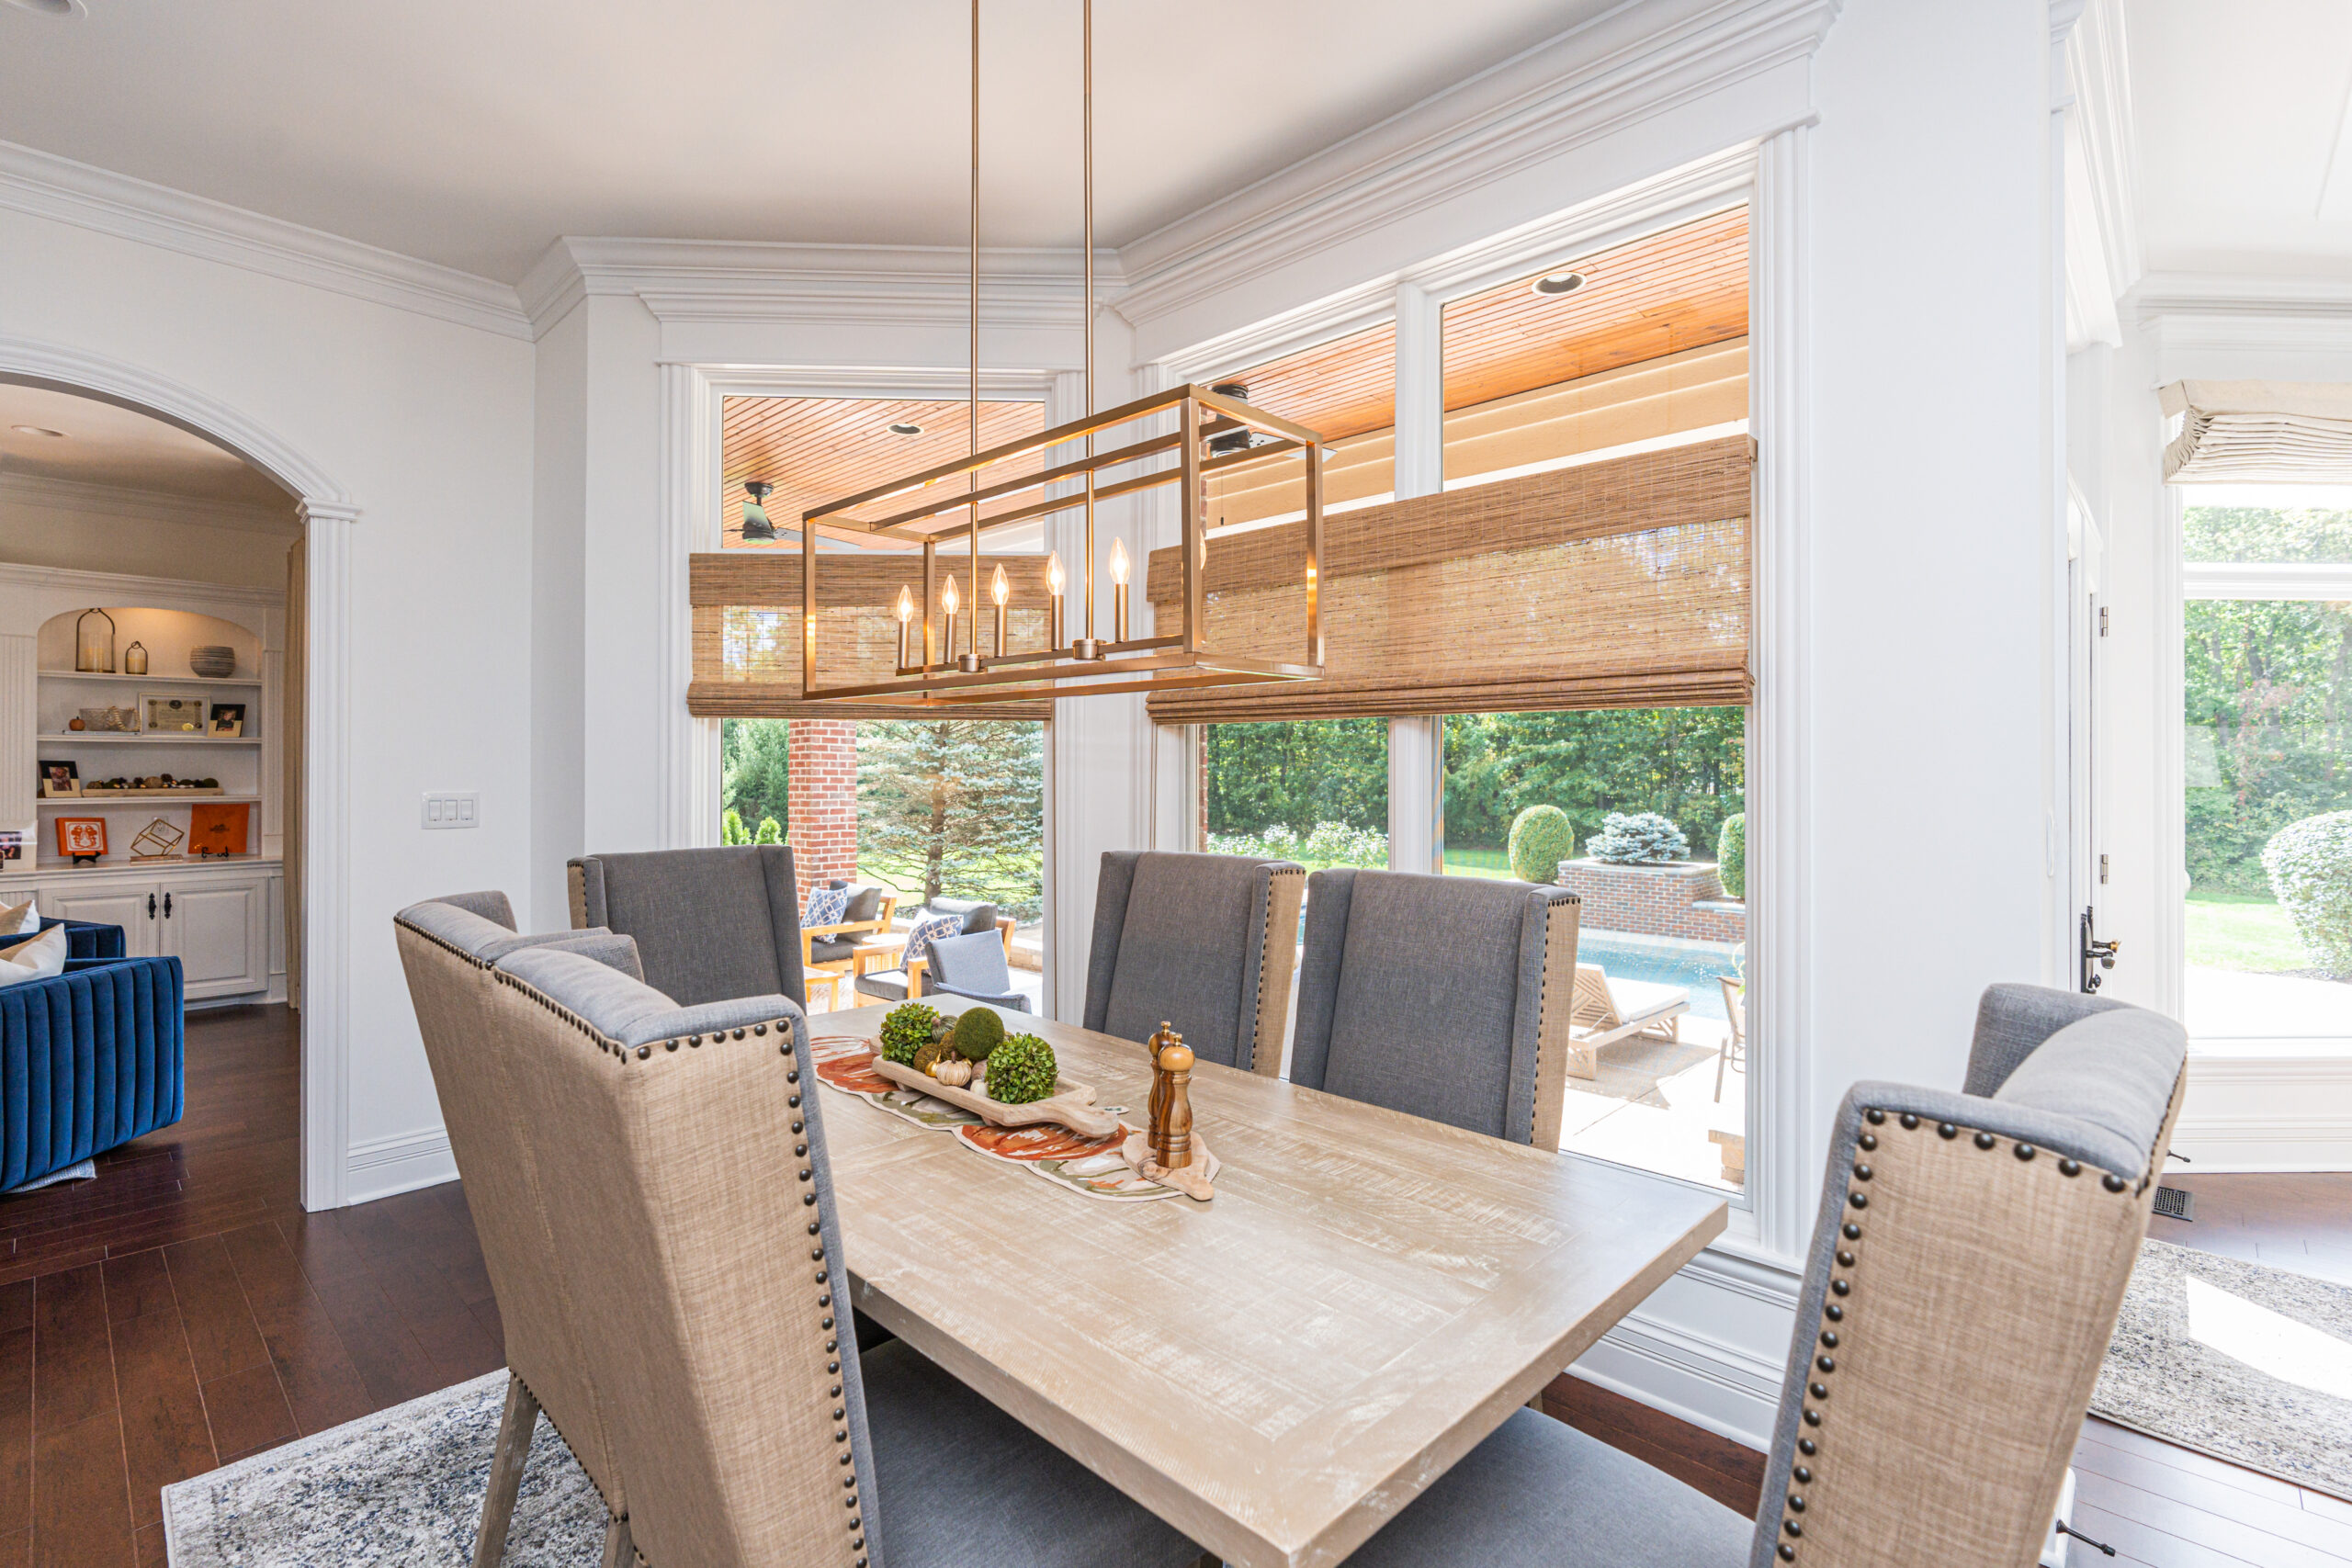 Dining room Provenance woven wood shades